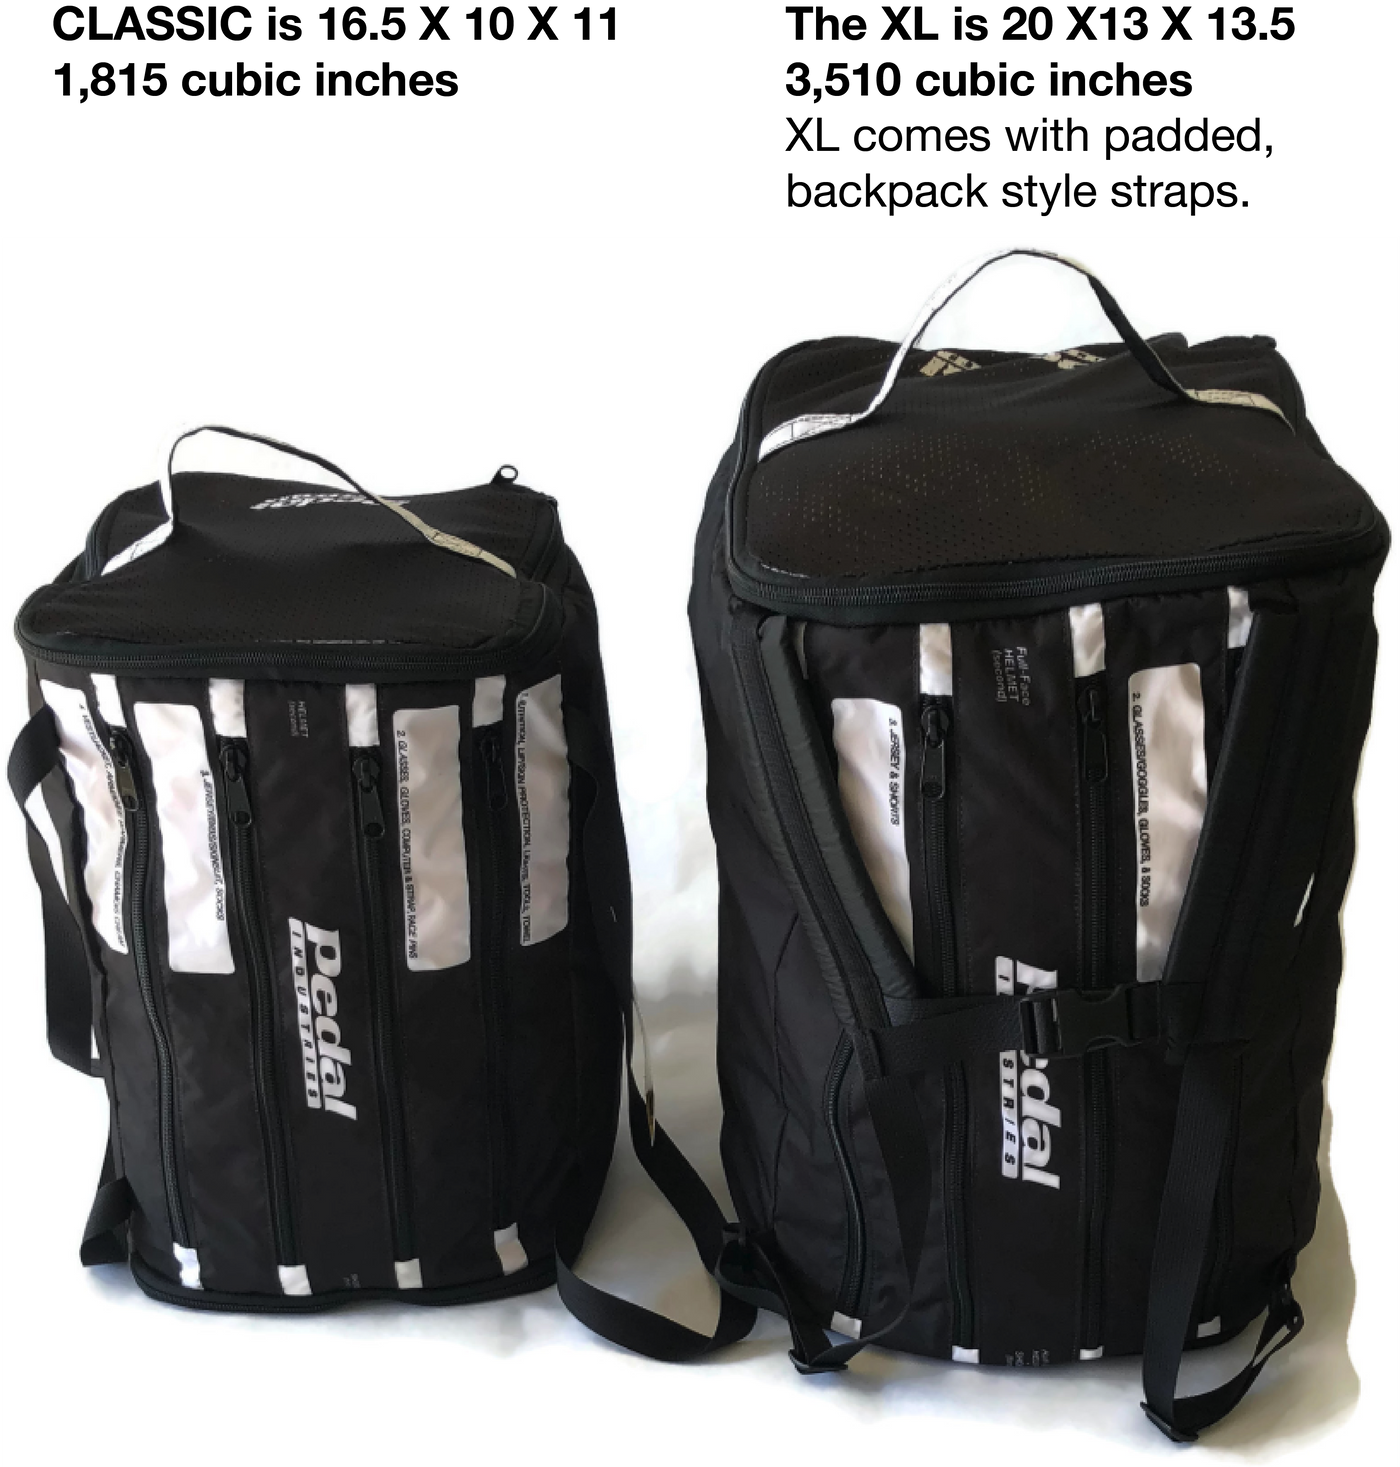 Flying Pigg '19 RACEDAY BAG - ships in about 3 weeks